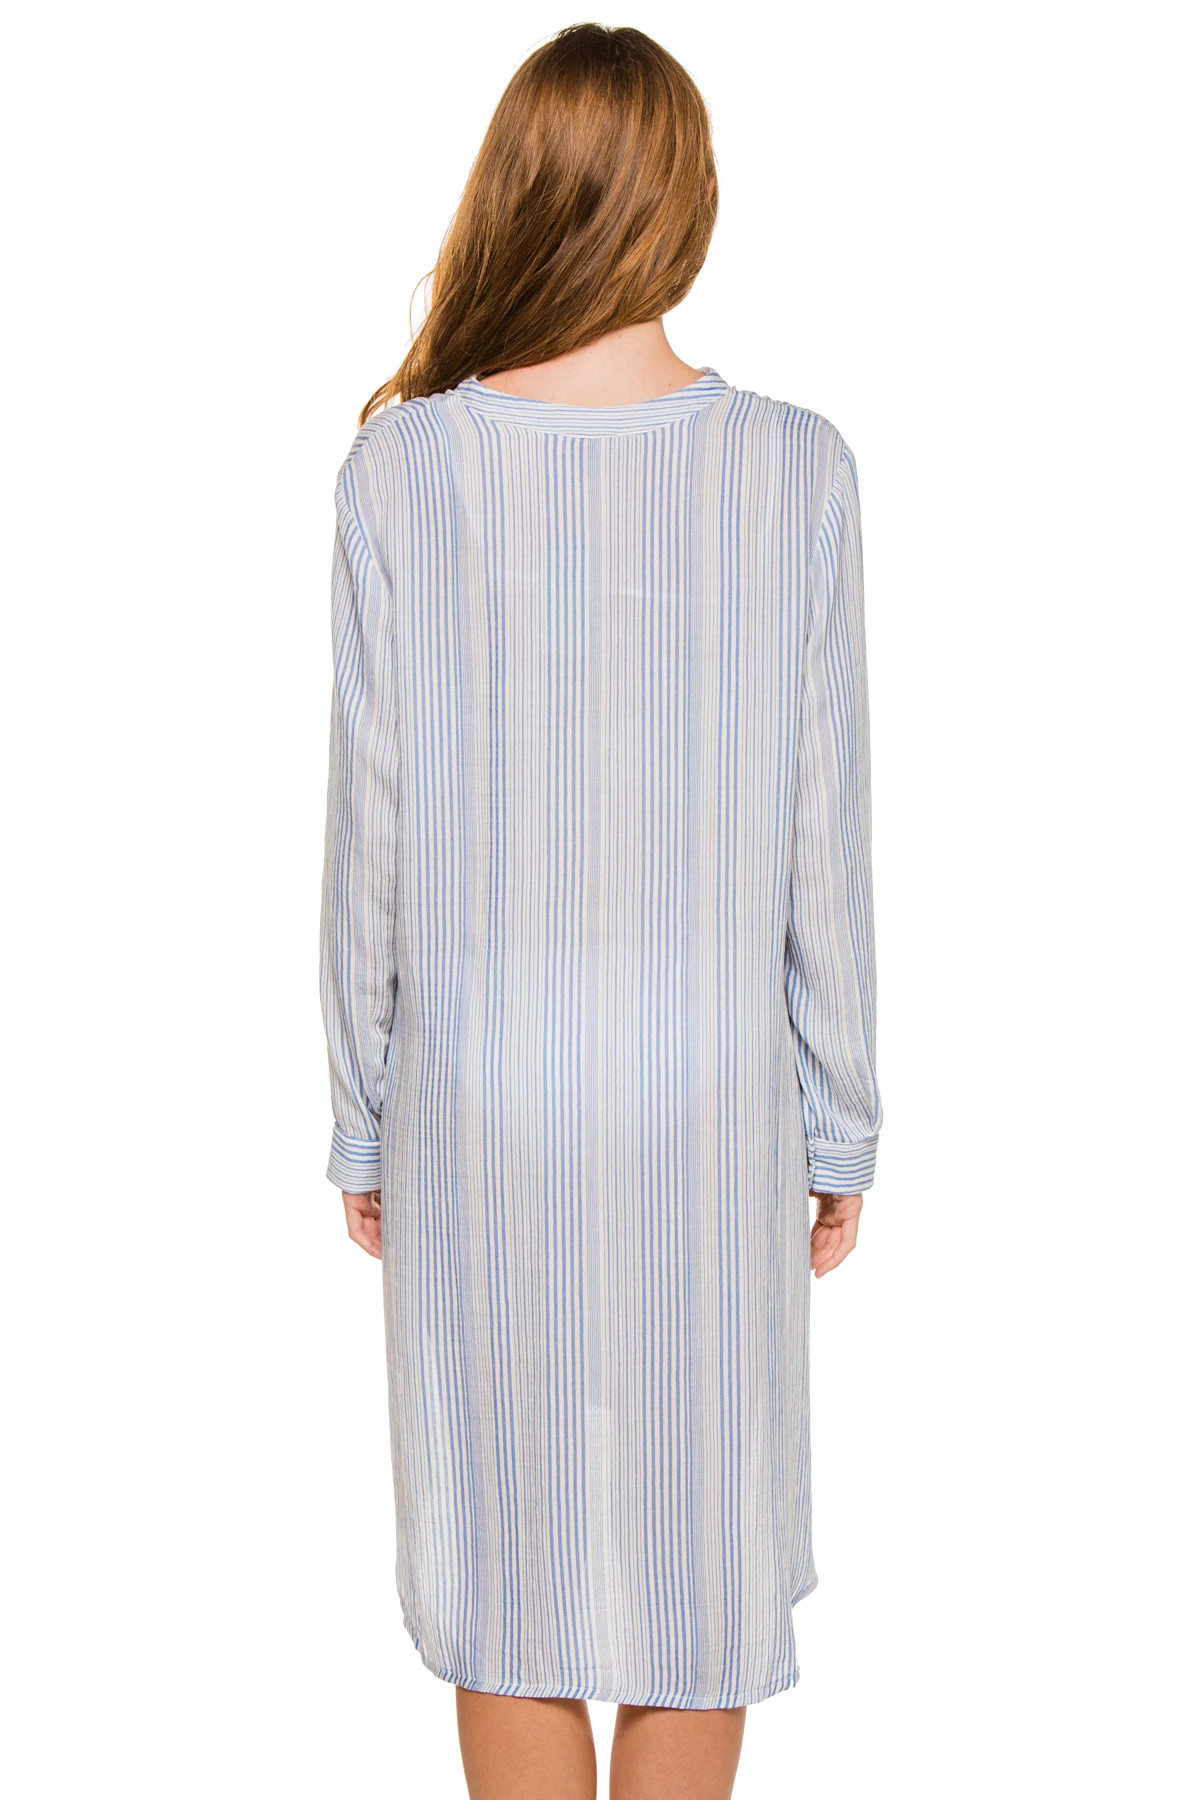 BLUE/WHITE Two Way Striped Shirt Dress image number 2